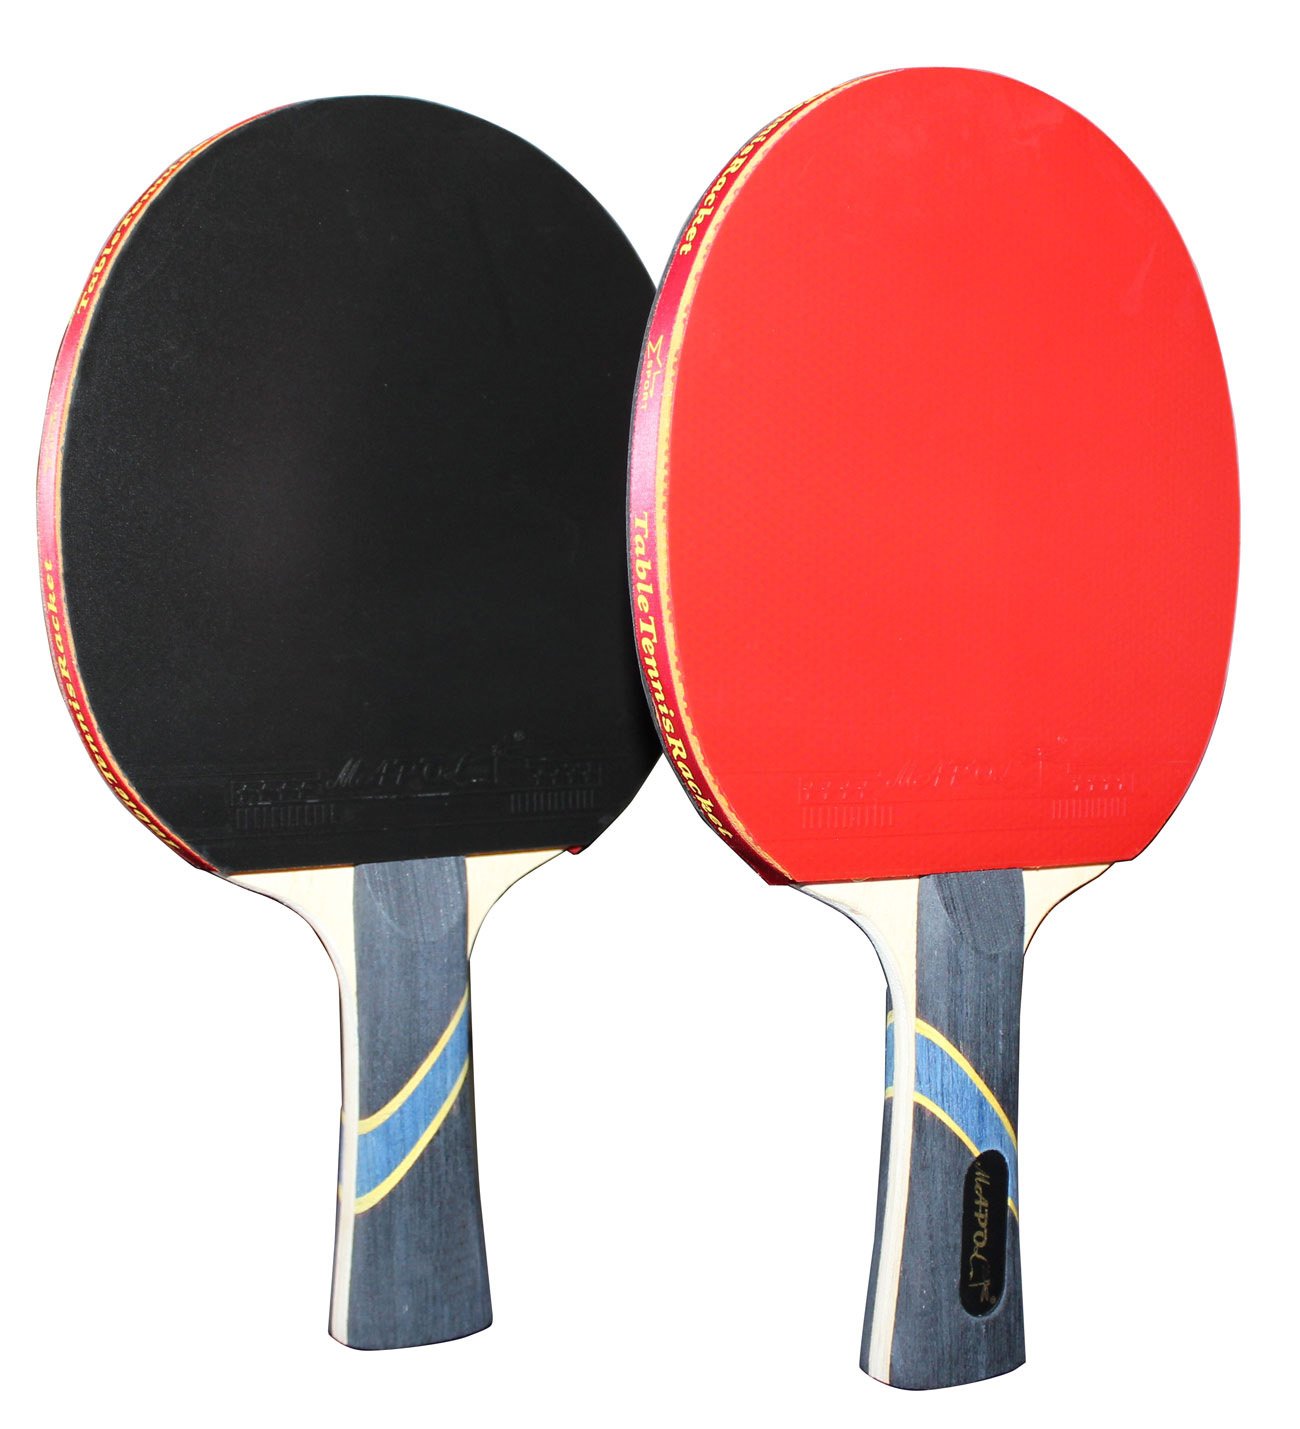 MAPOL 4 Star Professional Ping Pong Paddle Advanced Training Table Tennis Racket with Carry Case (2PCS)